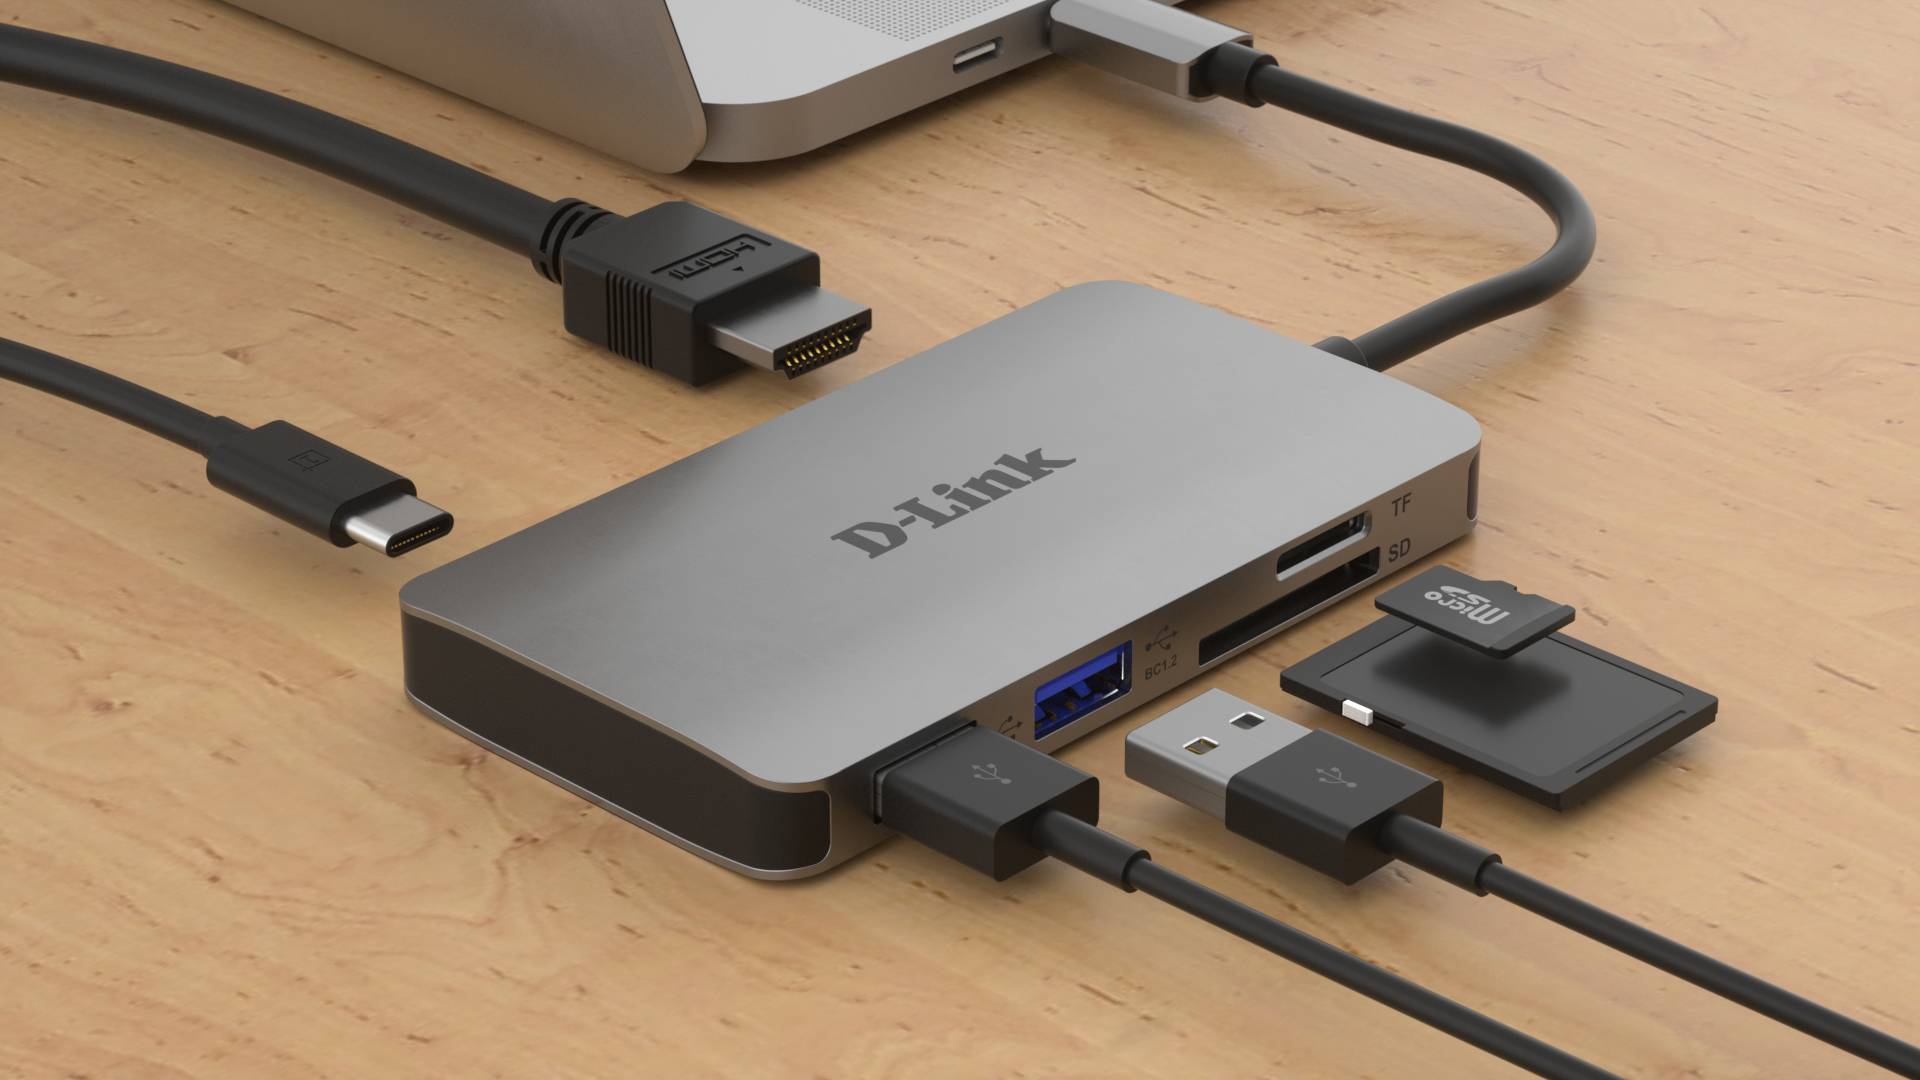 Rca Informatique - image du produit : 6-IN-1 USB-C HUB WITH HDMI CARD READER/POWER DELIVERY